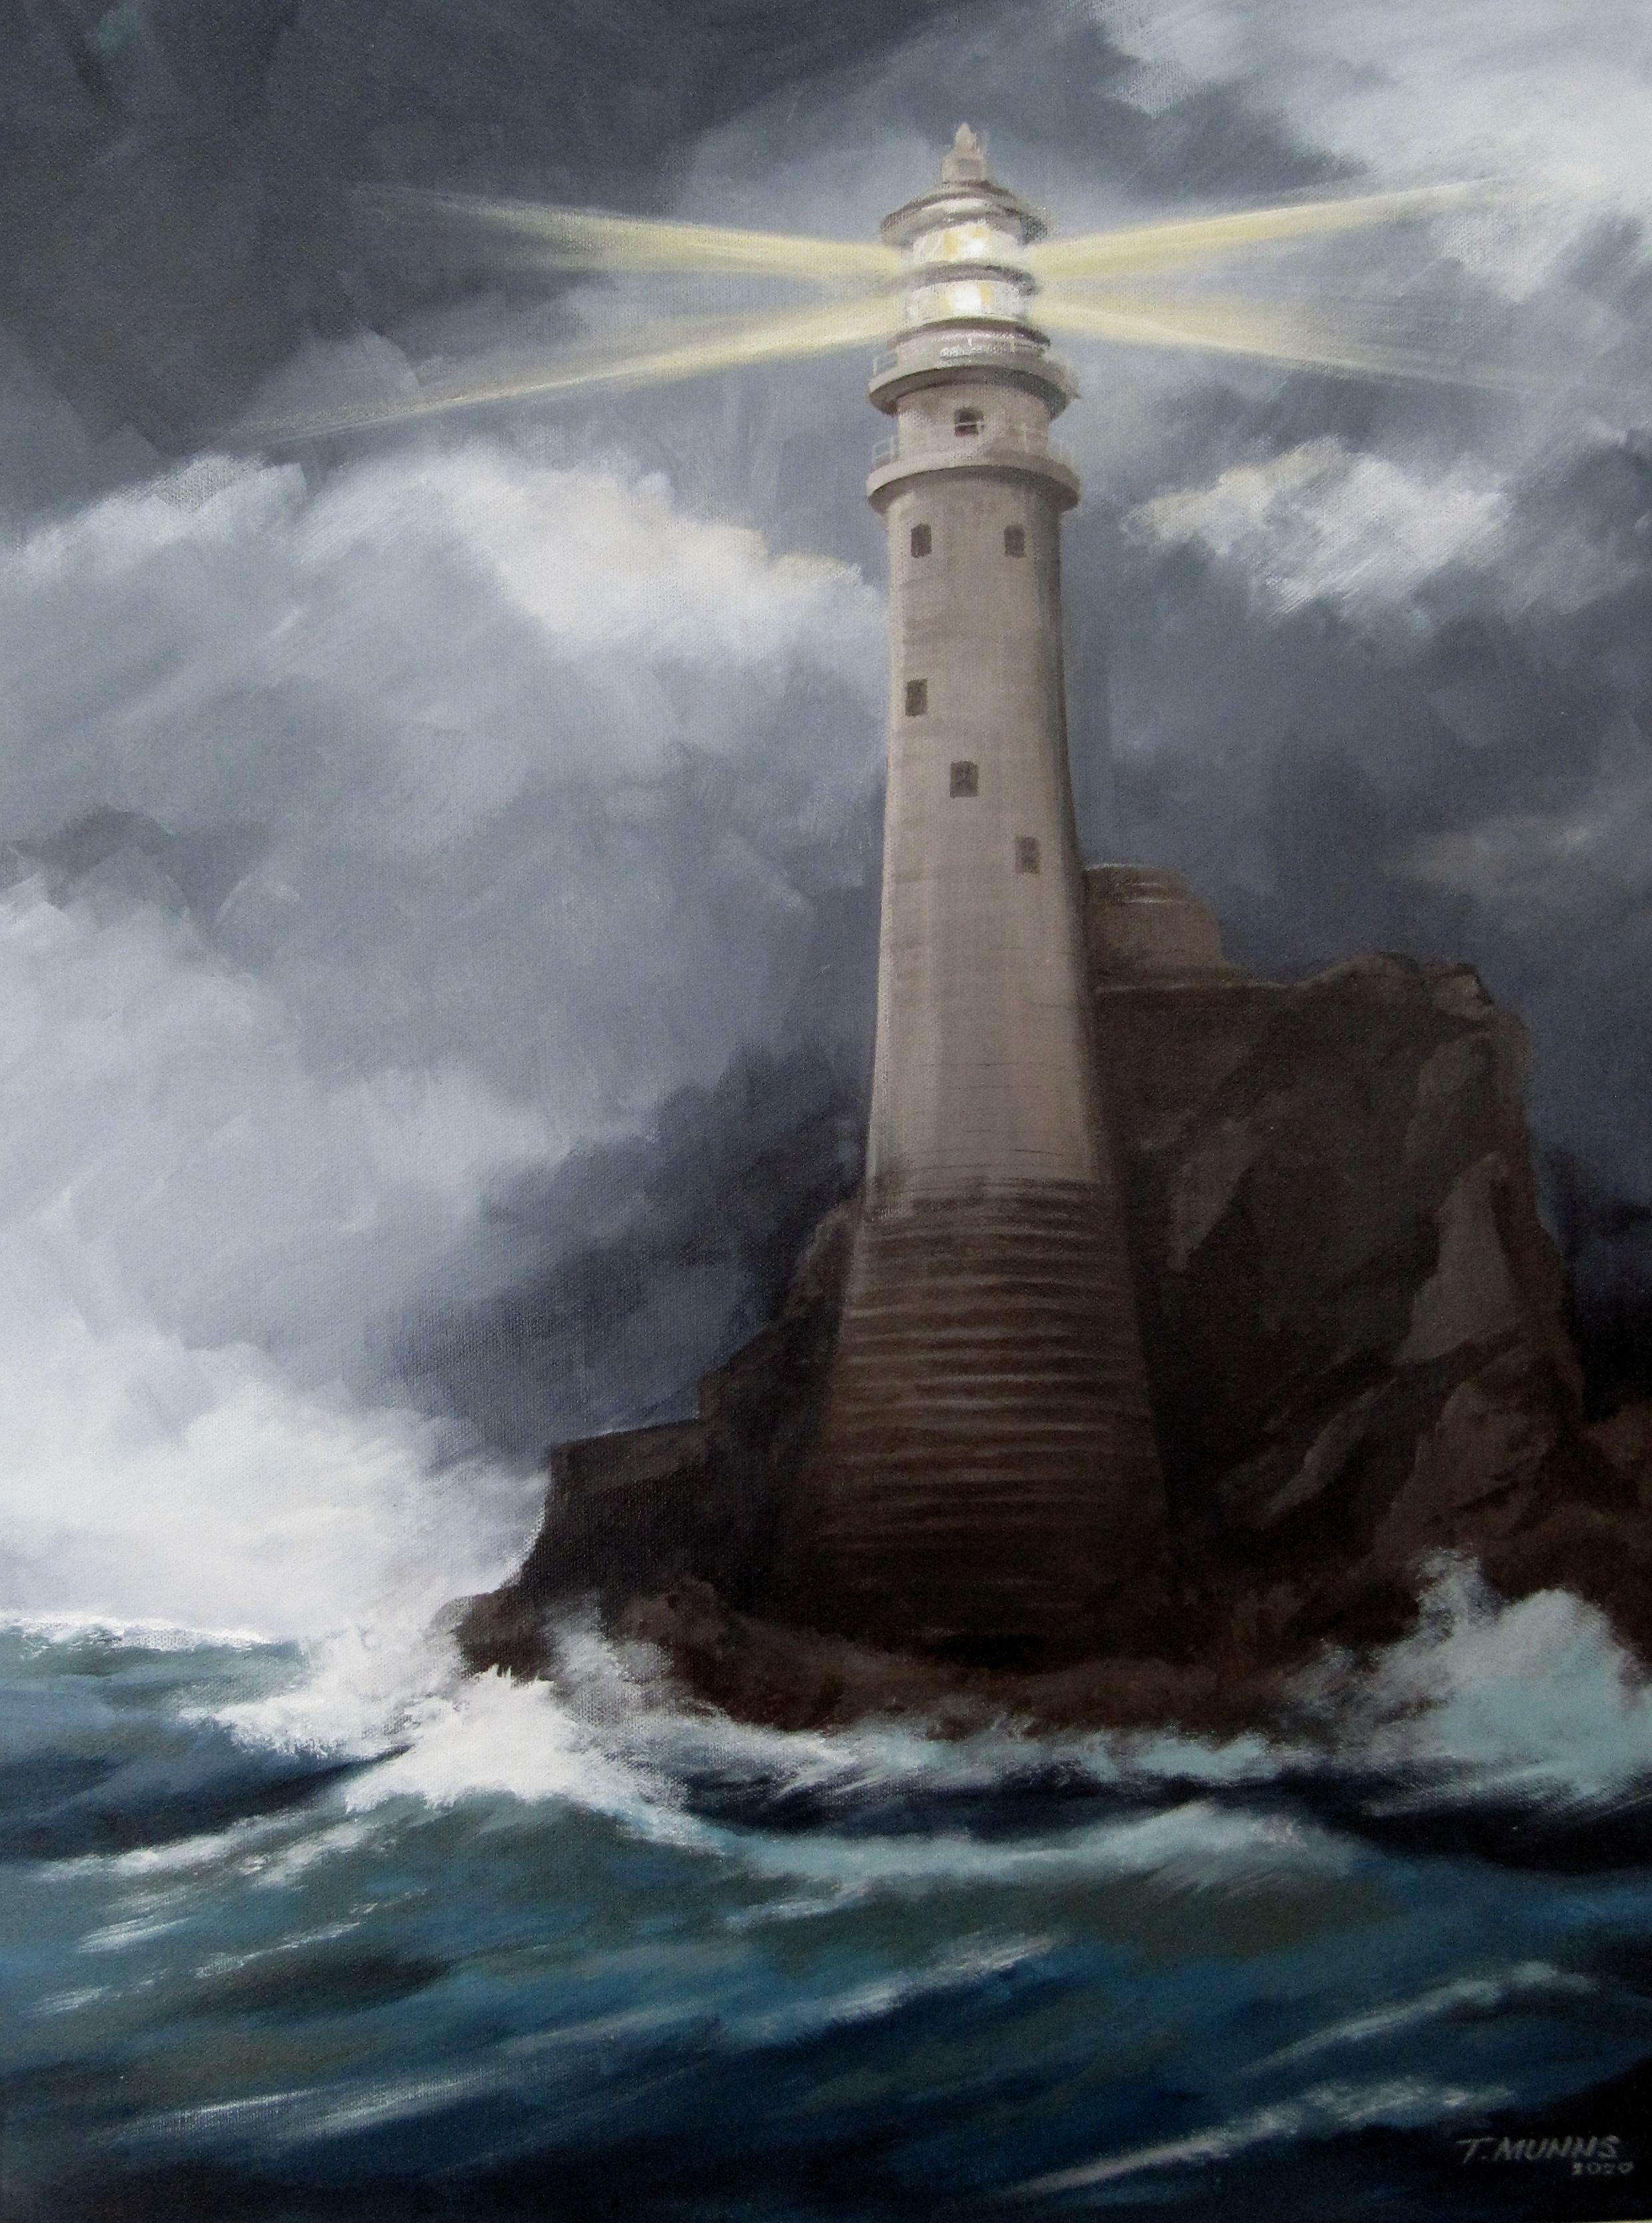 A medium sized unframed original acrylic painting on deep-edge canvasÂ showing the dramatic setting of the lighthouseÂ and a stormy sea at fastnet Rock, Southern Ireland.Â Edges are painted so that the artwork may be hung without framing if